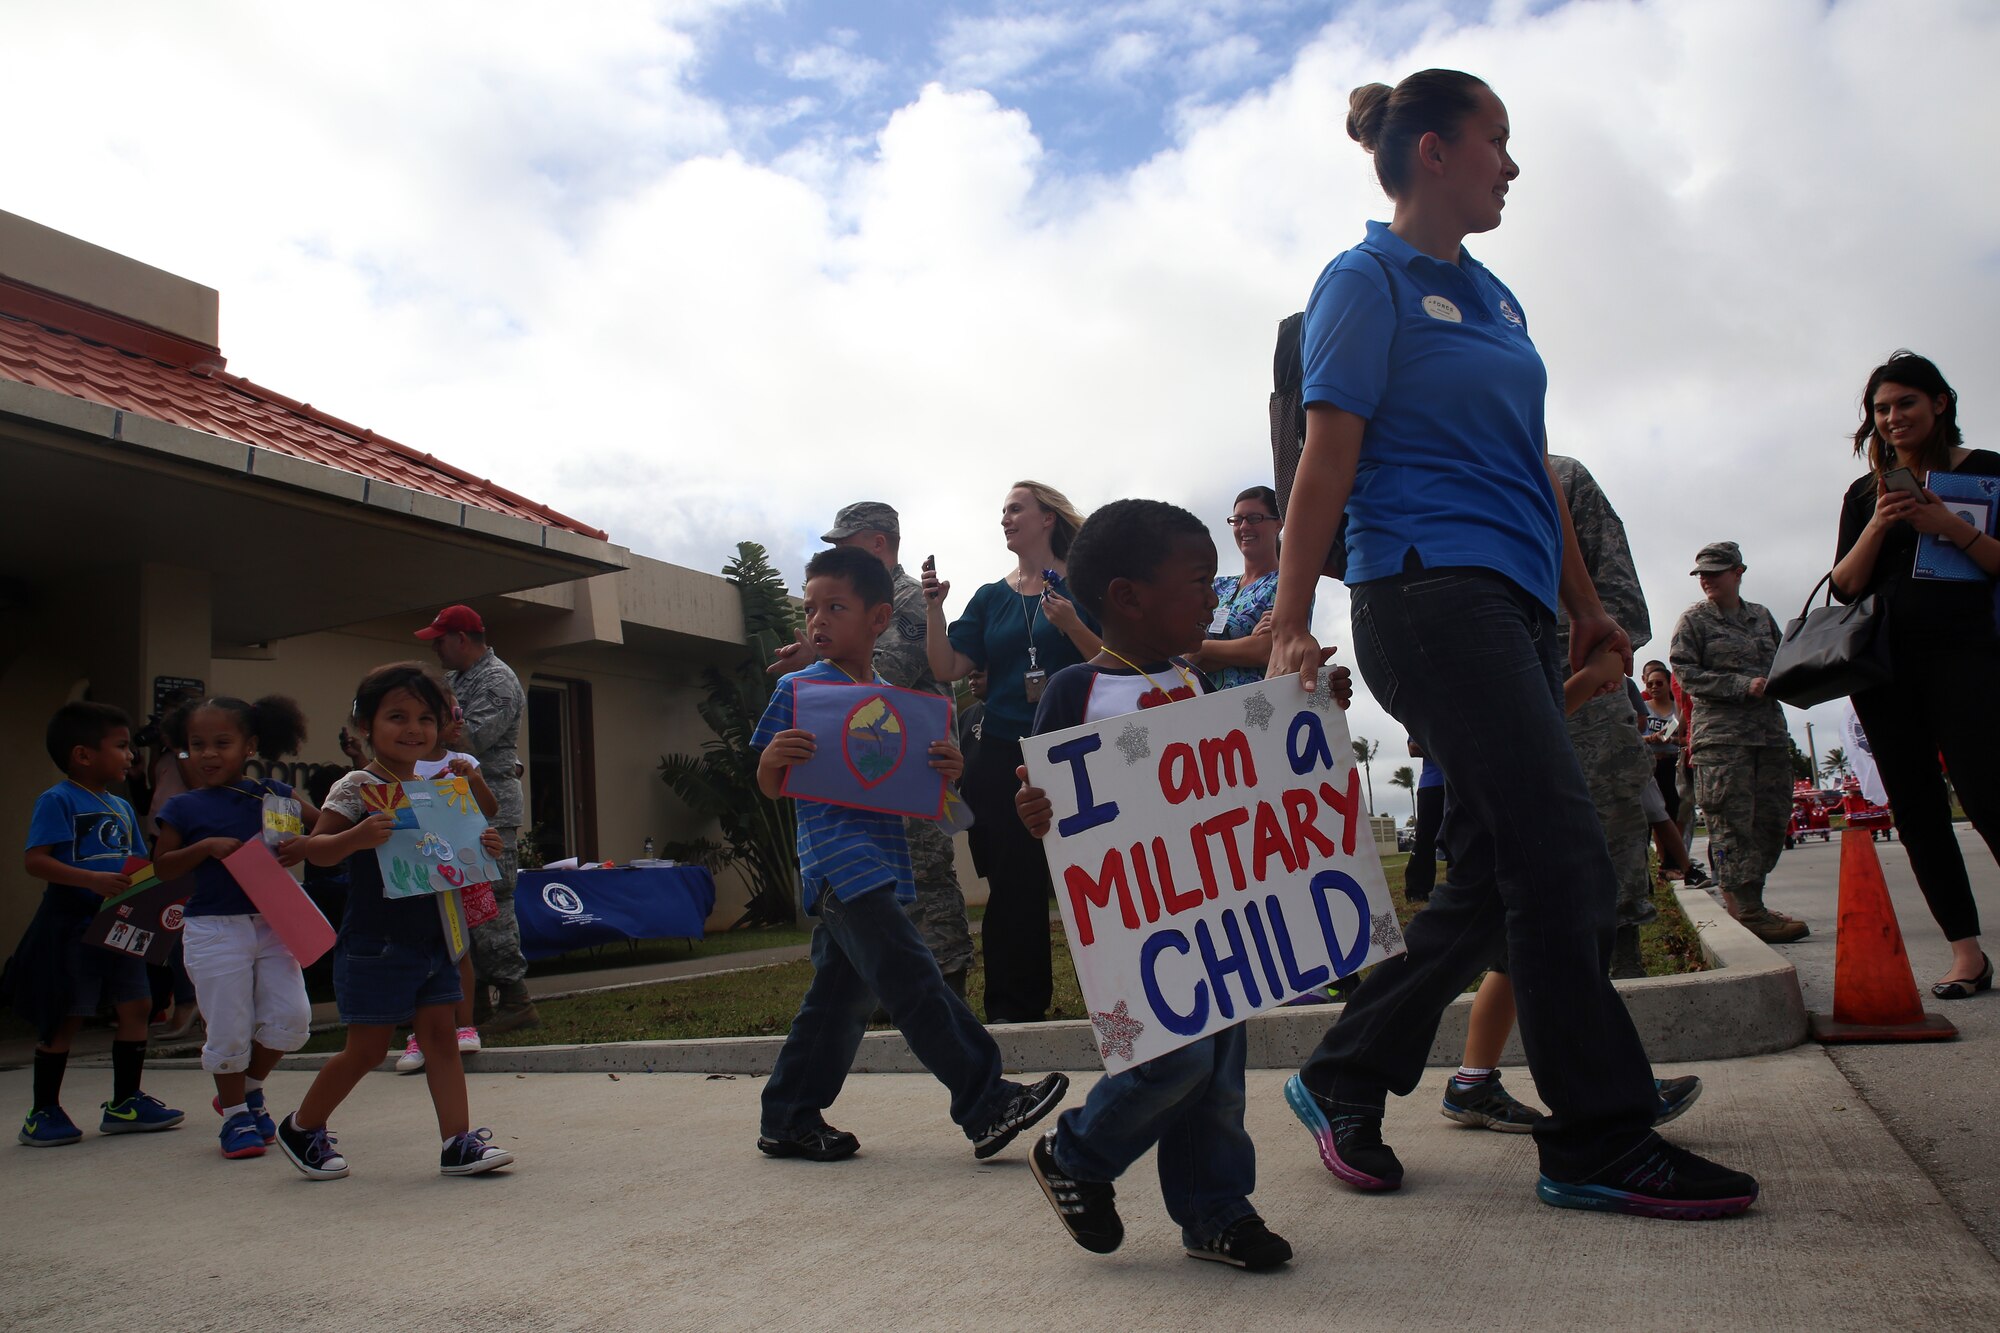 Andersen Child Development Center children and staff participate in a parade April 10, 2015, at Andersen Air Force Base, Guam, to celebrate the Month of the Military Child. April was designated as the Month of the Military Child in 1986 to recognize sacrifices and contributions of children in the armed forces community. (U.S. Air Force photo by Staff Sgt. Melissa B. White/Released)